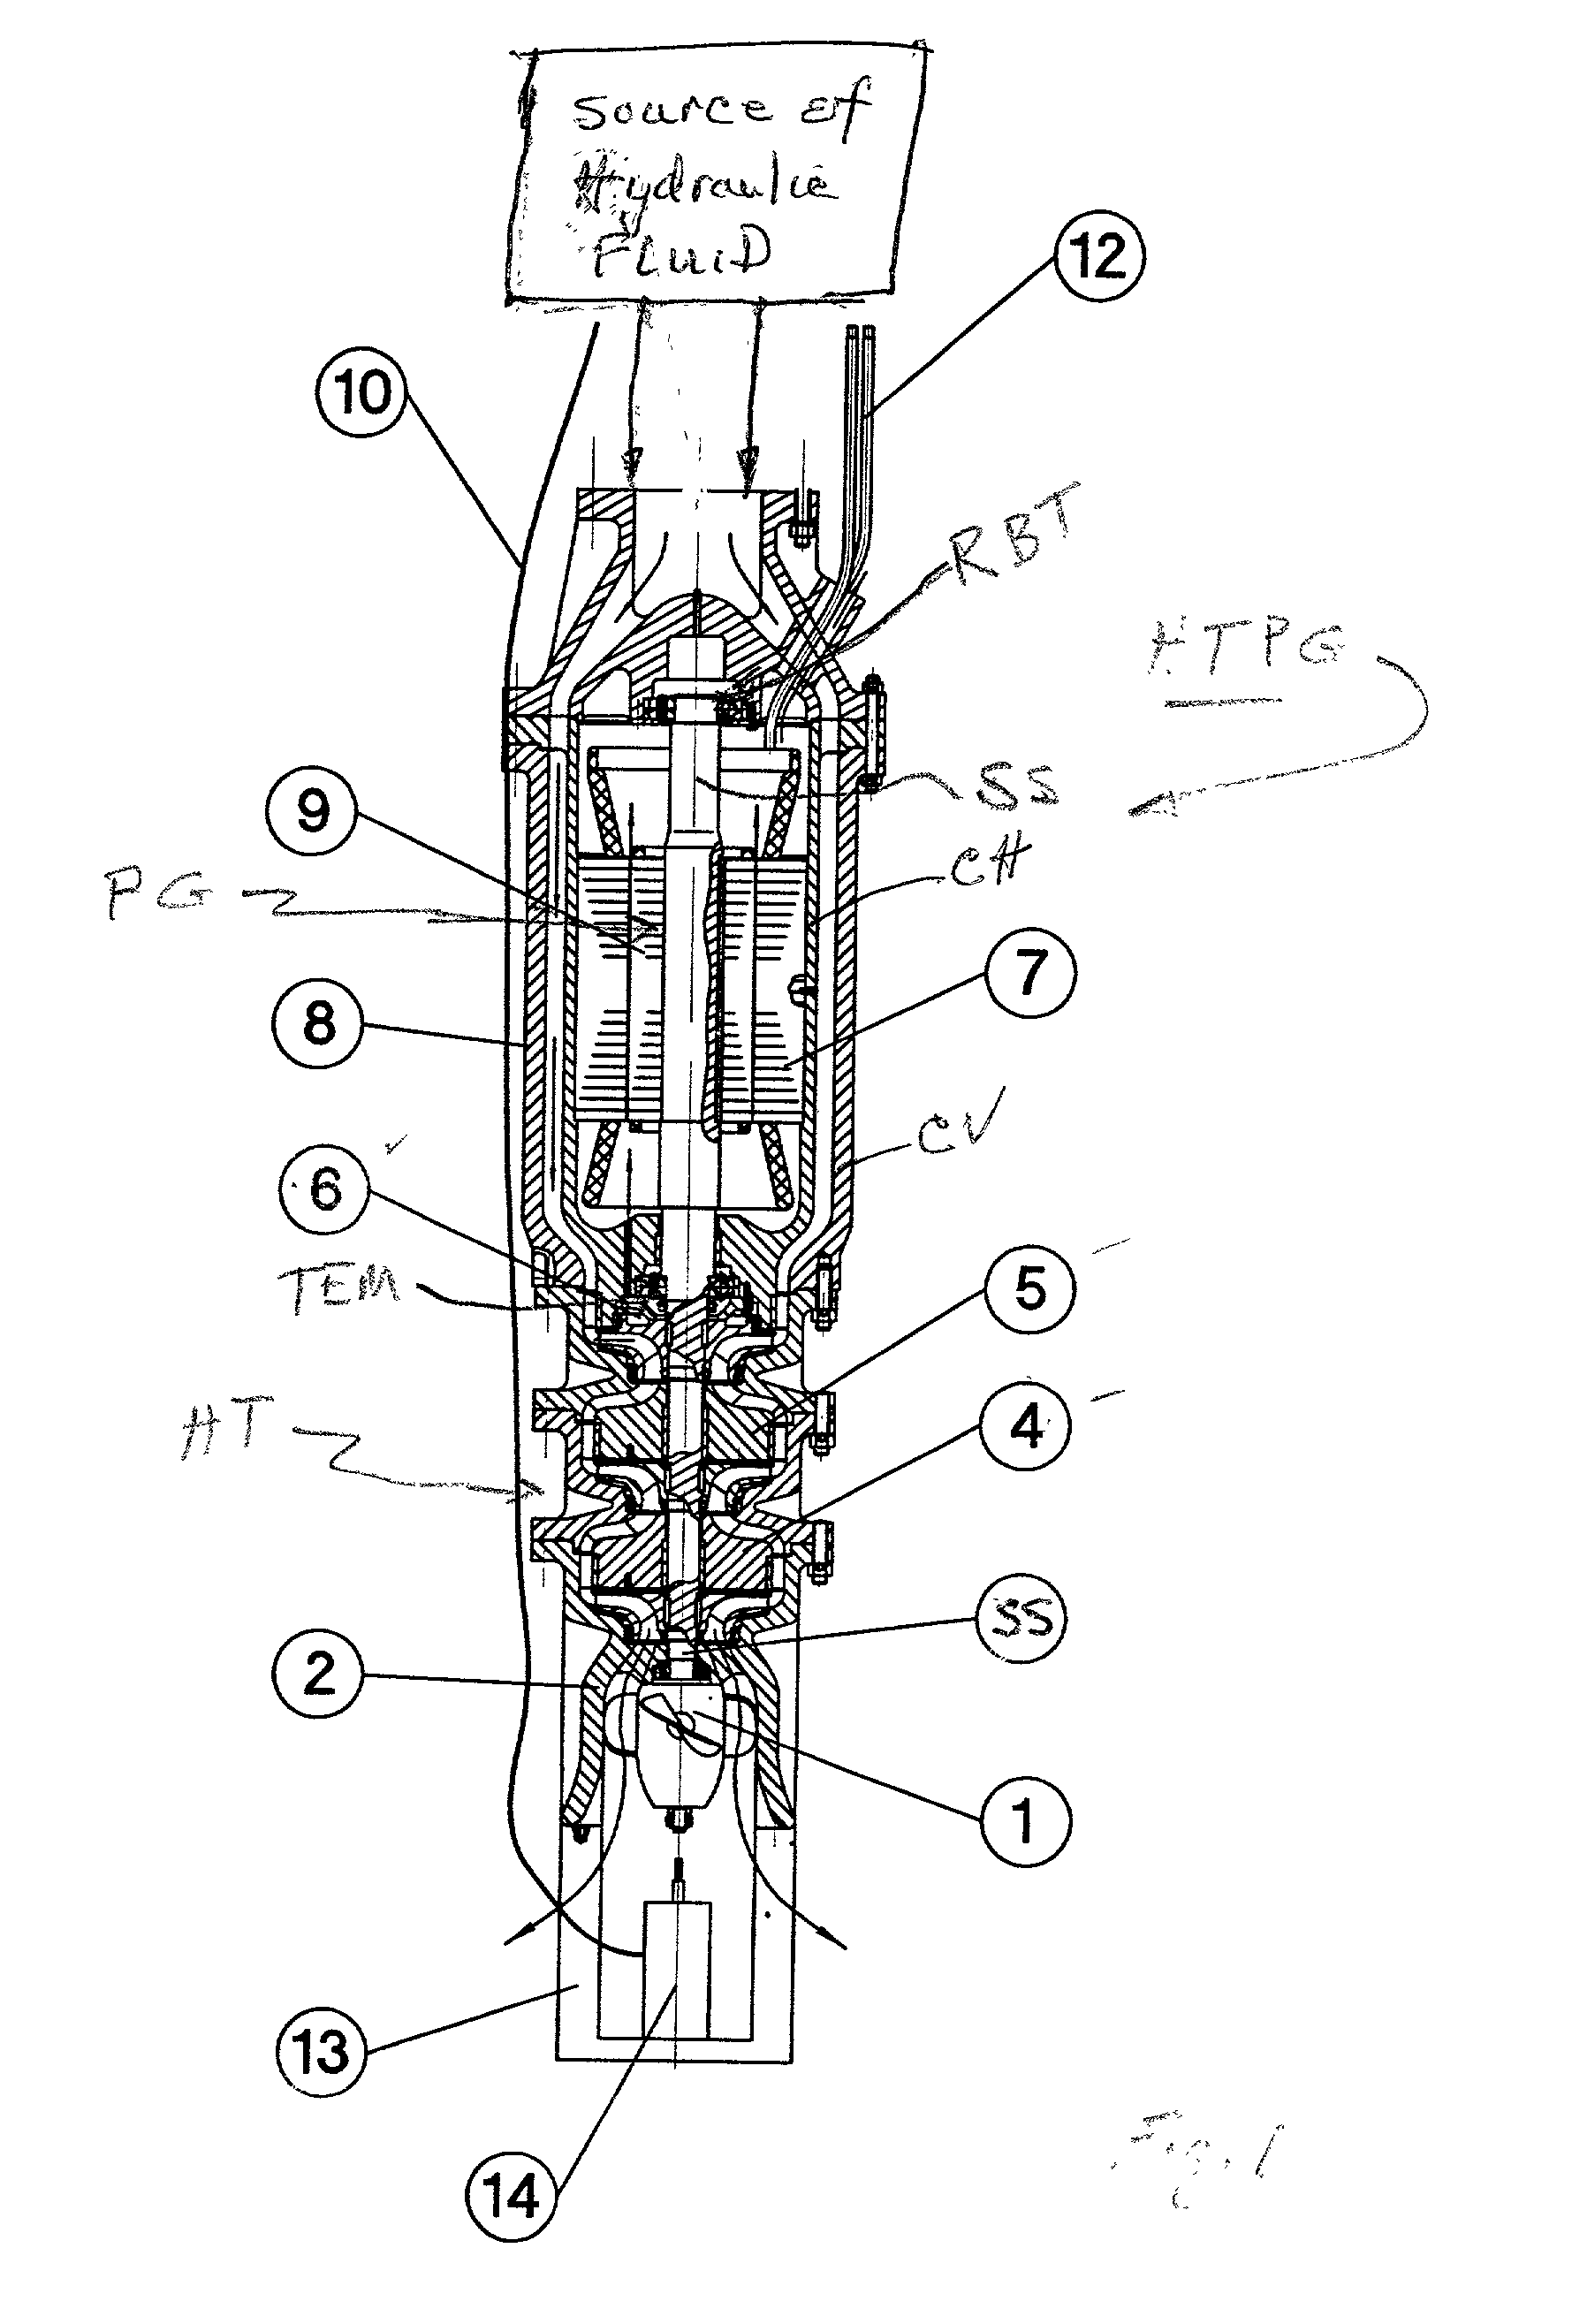 Dual type multiple stage, hydraulic turbine power generator including reaction type turbine with adjustable blades